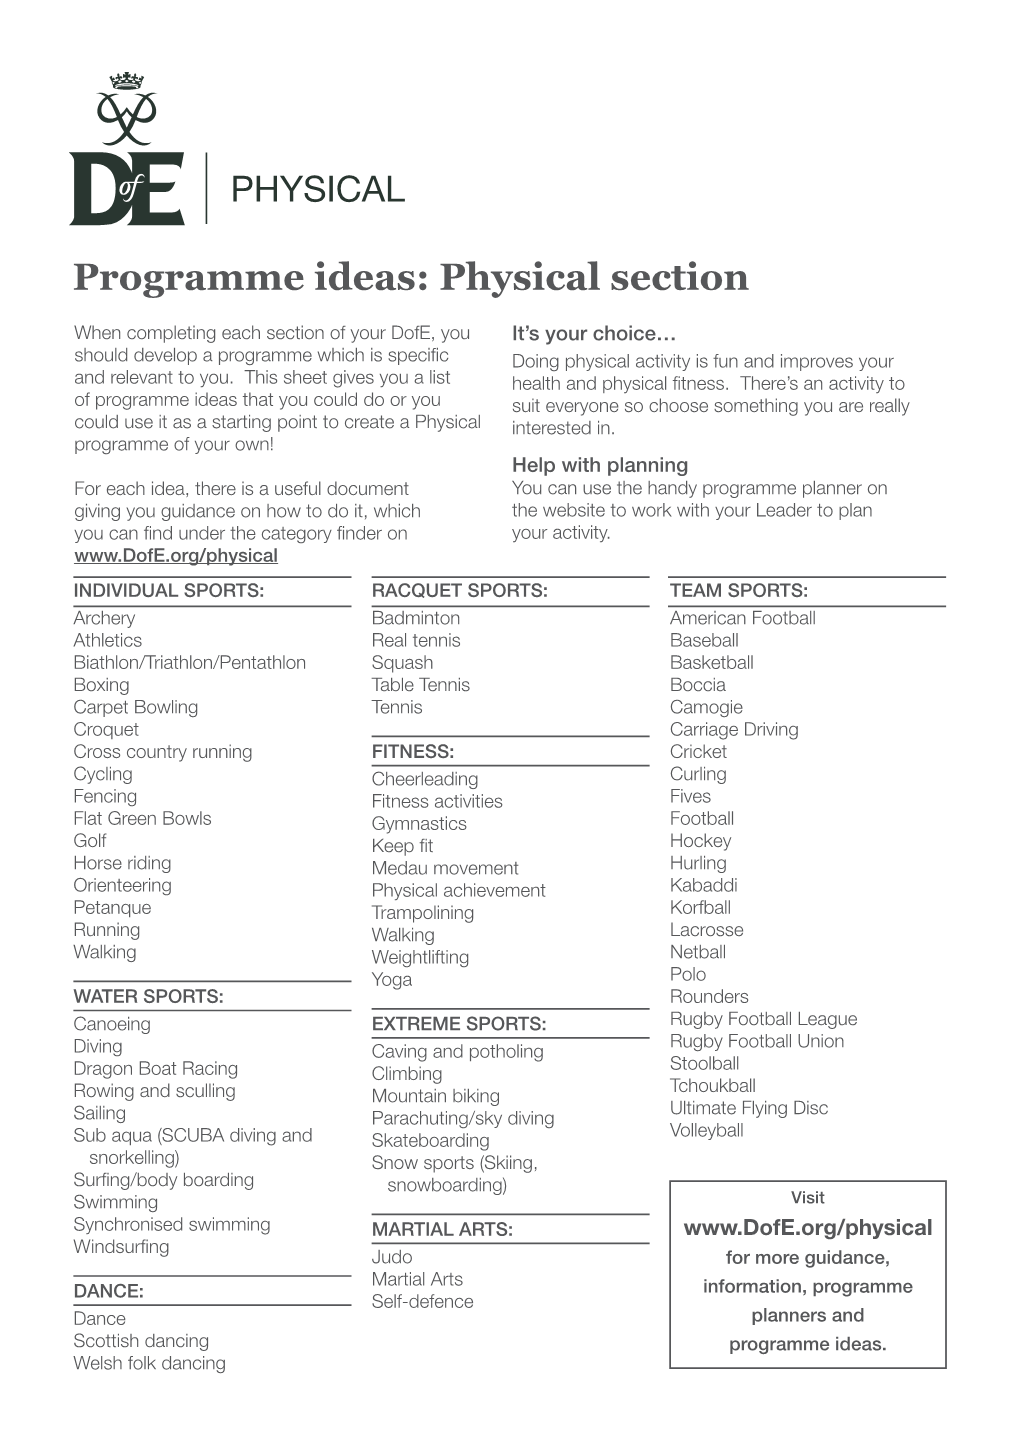 Programme Ideas: Physical Section